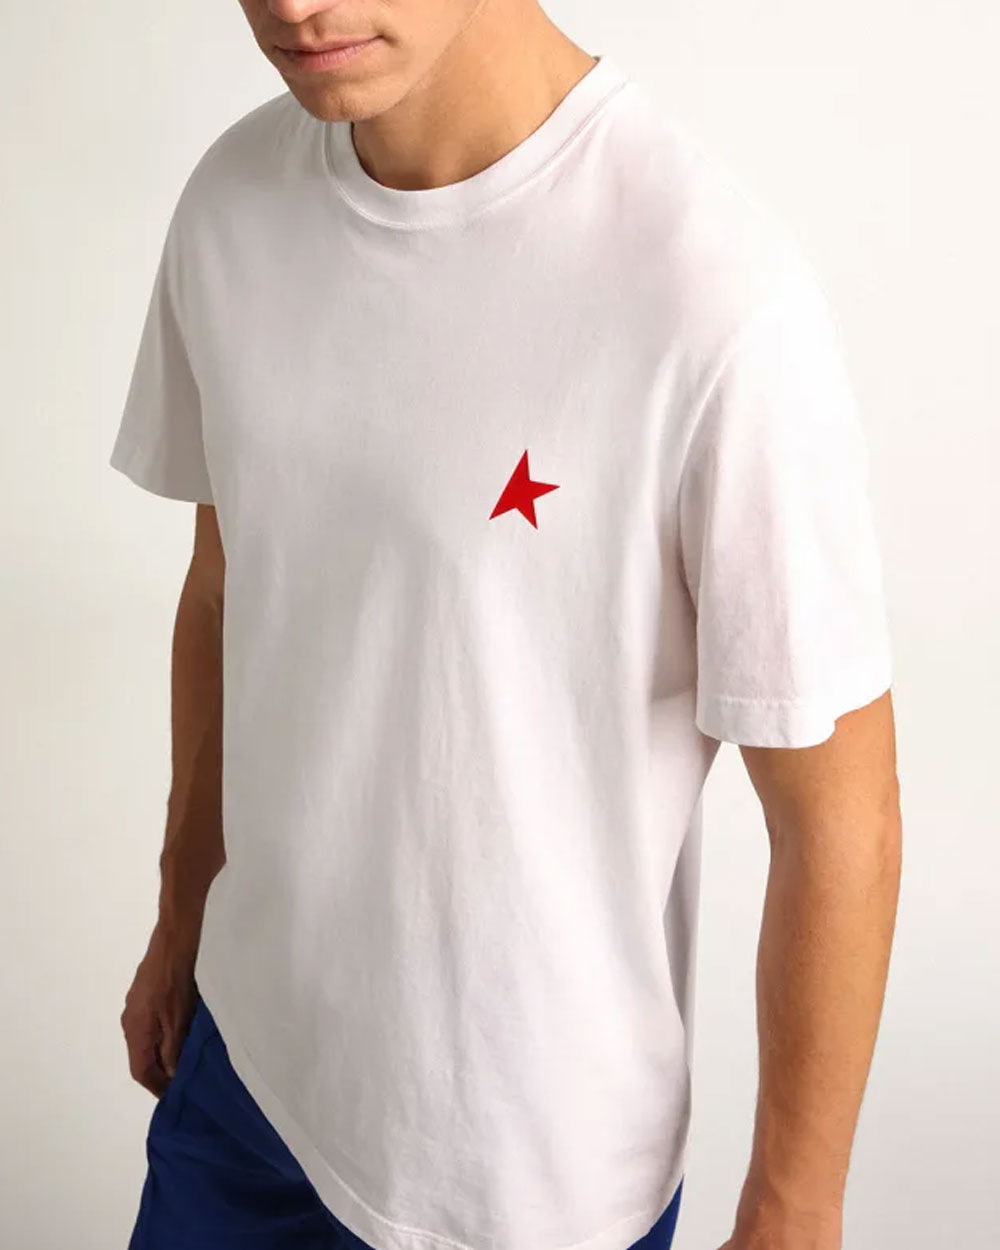 Star Collection T-Shirt in White with Red Star